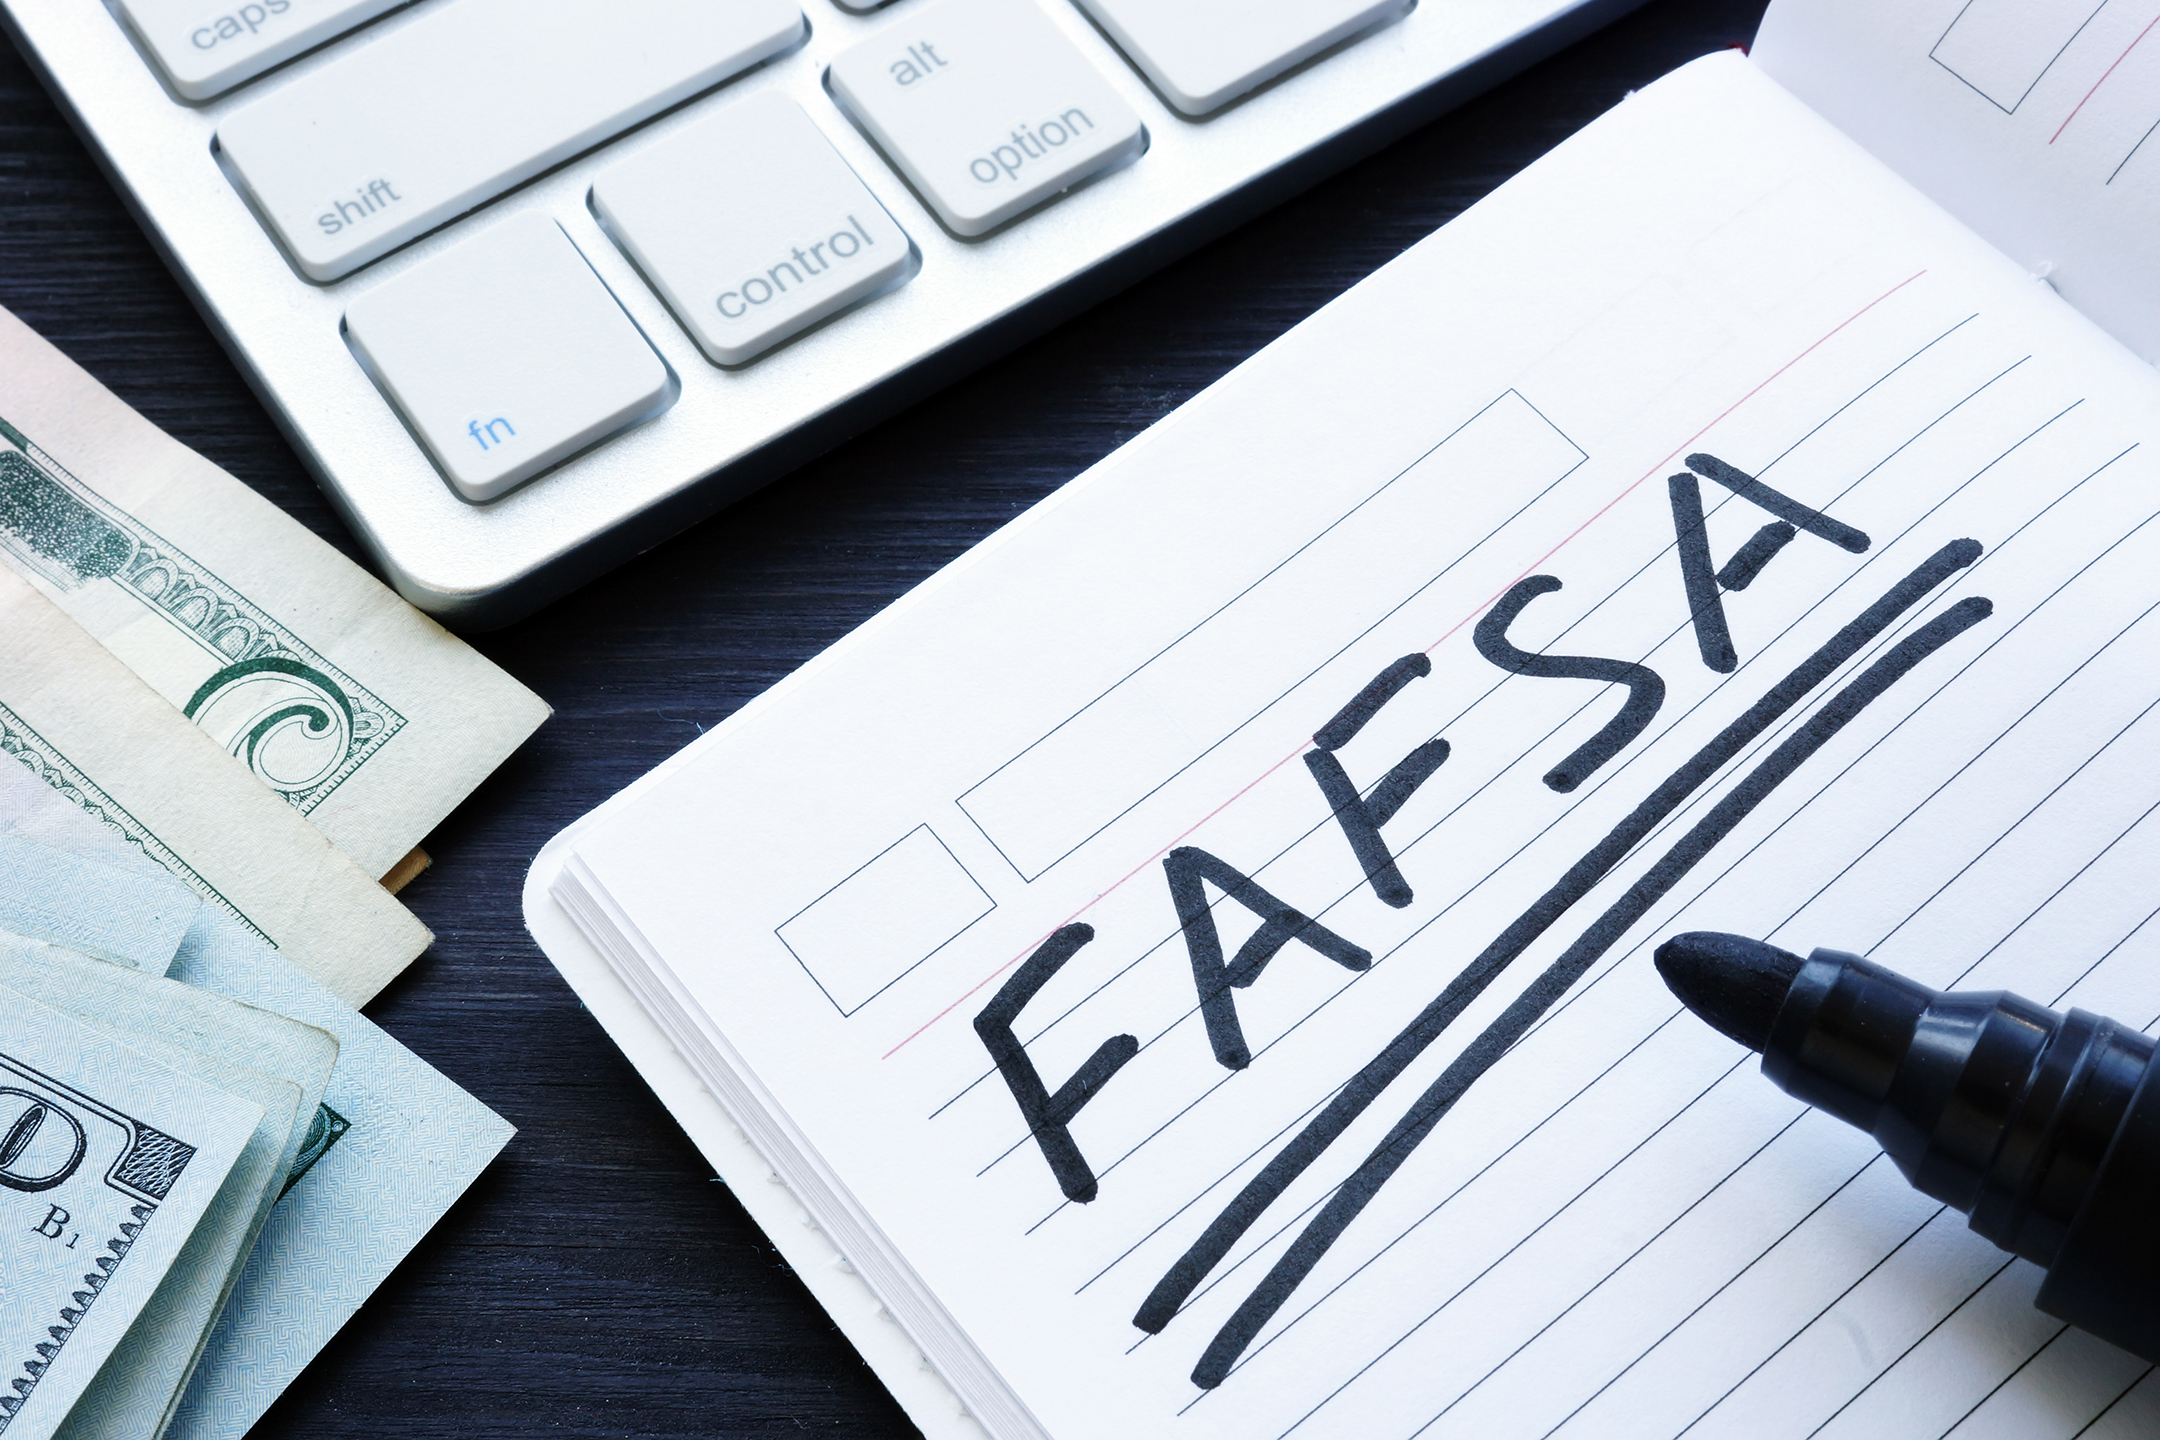 Why Fill Out the FAFSA? The Elective